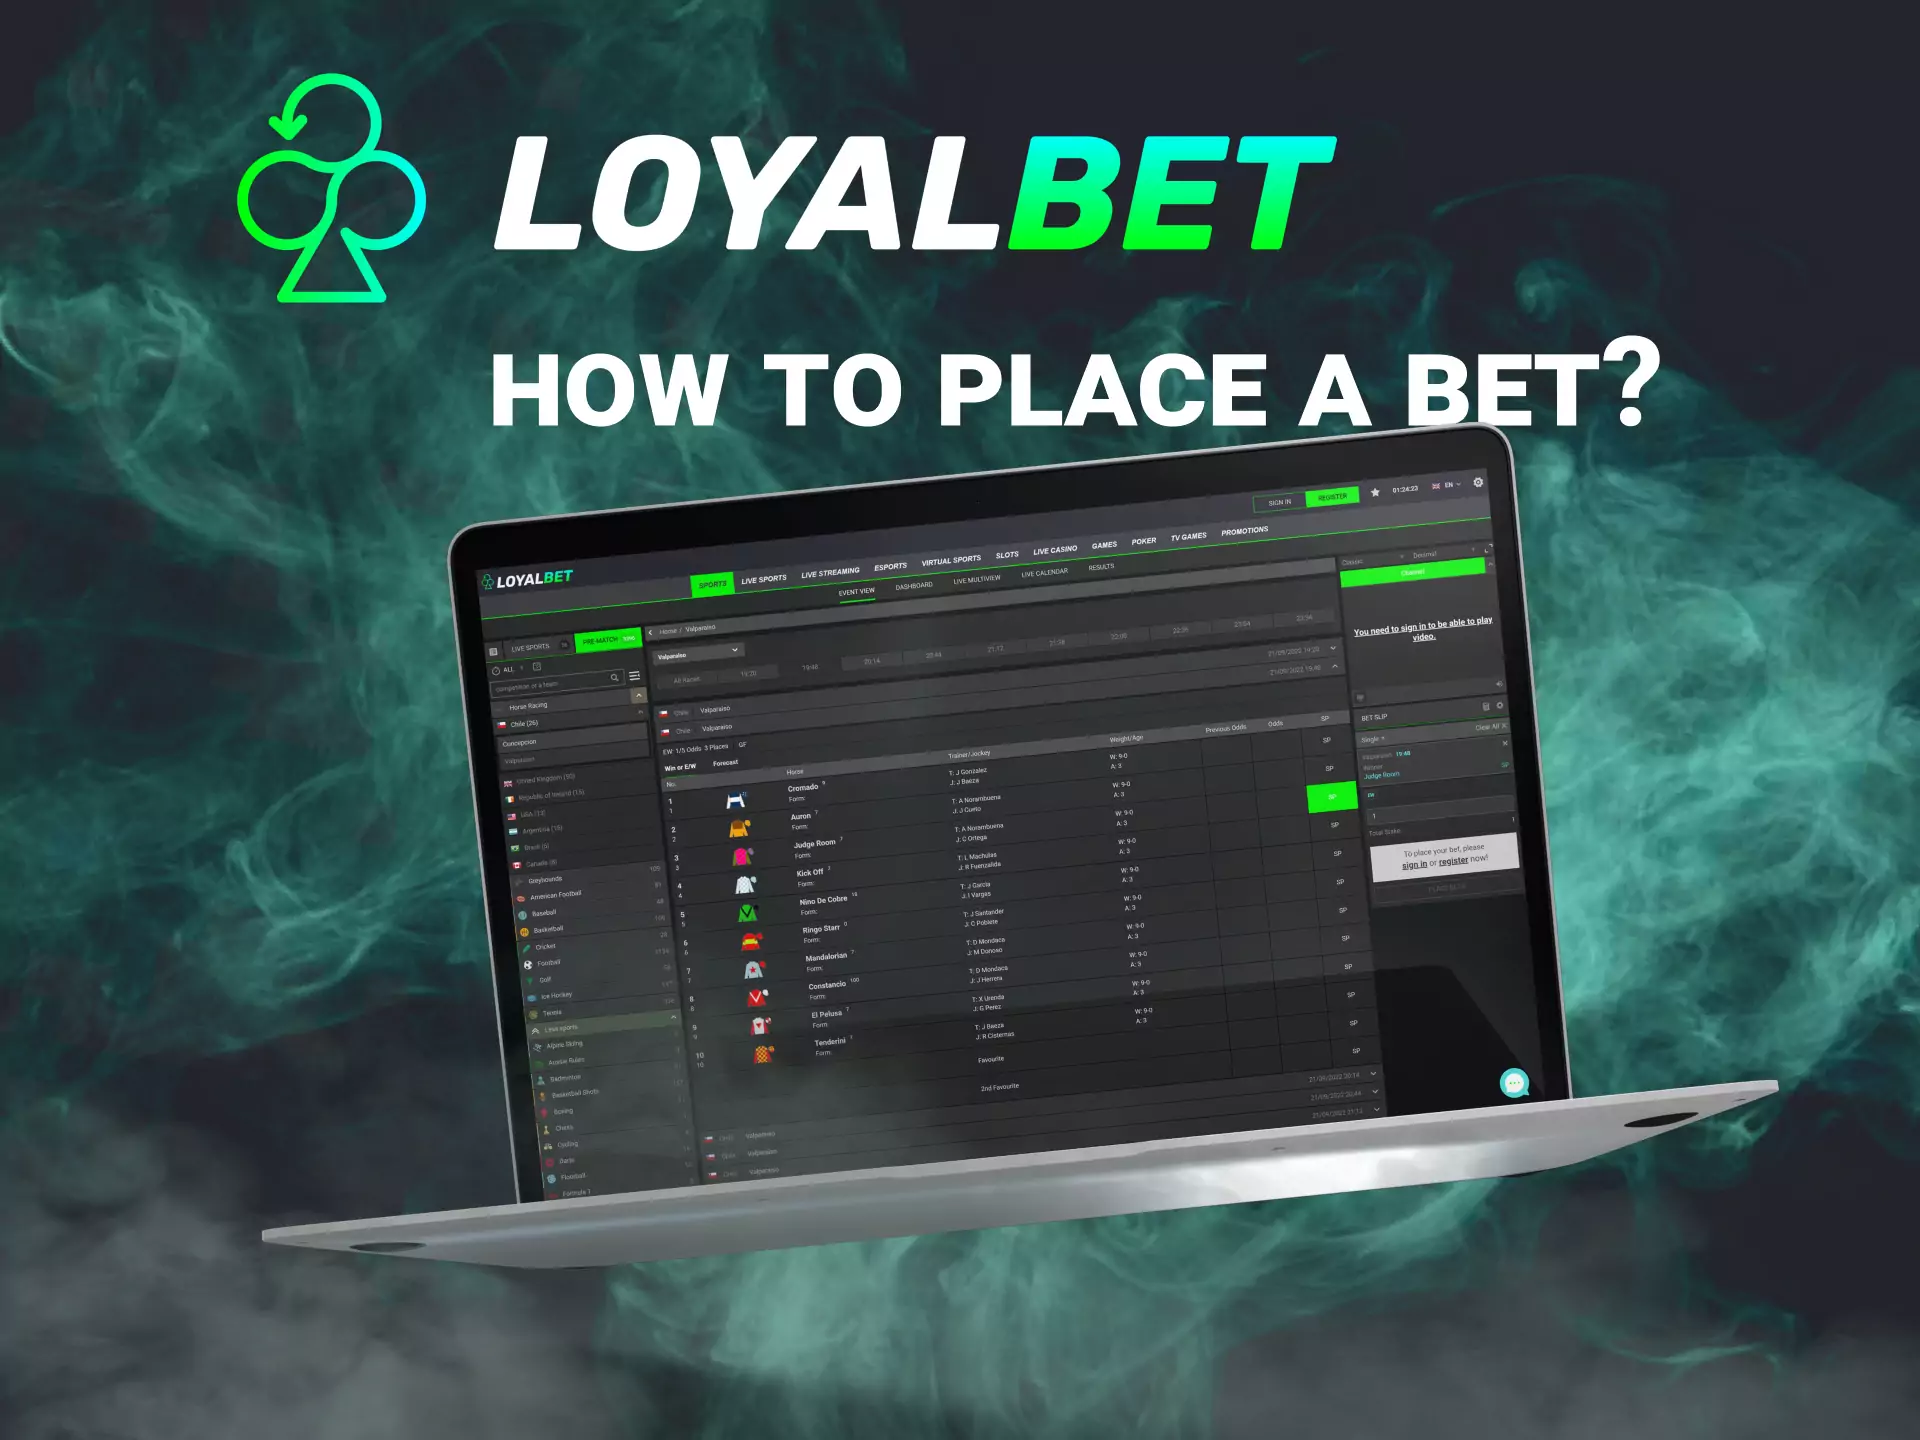 Visit the Loyalbet website, choose a match and place a bet.